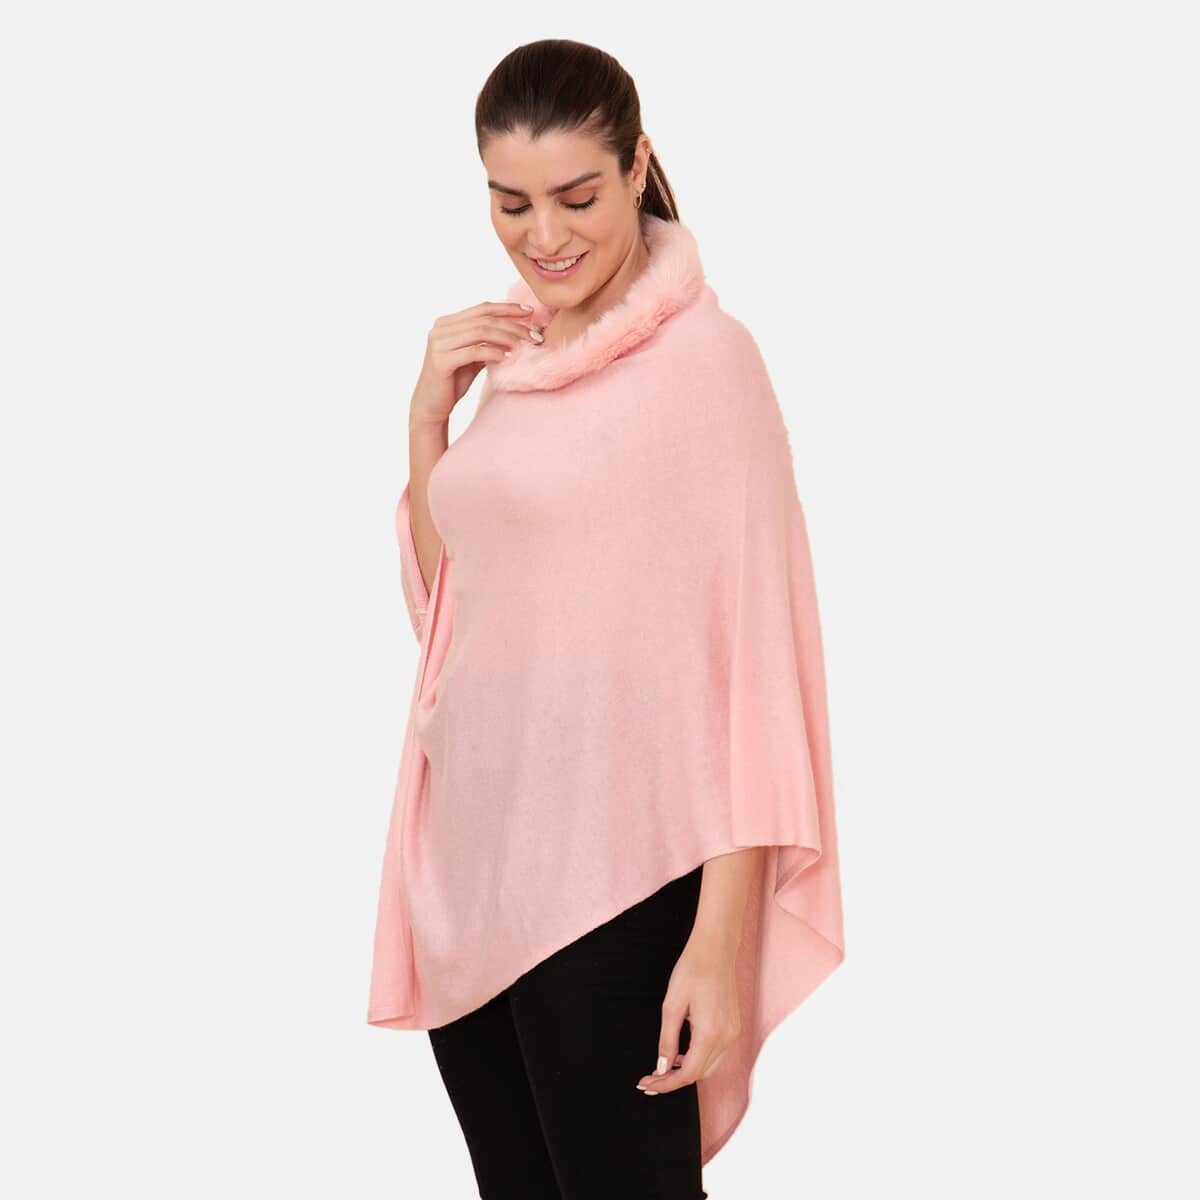 LA MAREY 100% Pashmina Cashmere Dusty Rose Designer Poncho for Women with Faux Fur Trim - One Size Fits Most , Cashmere Poncho , Women Capes , Poncho Scarf image number 3